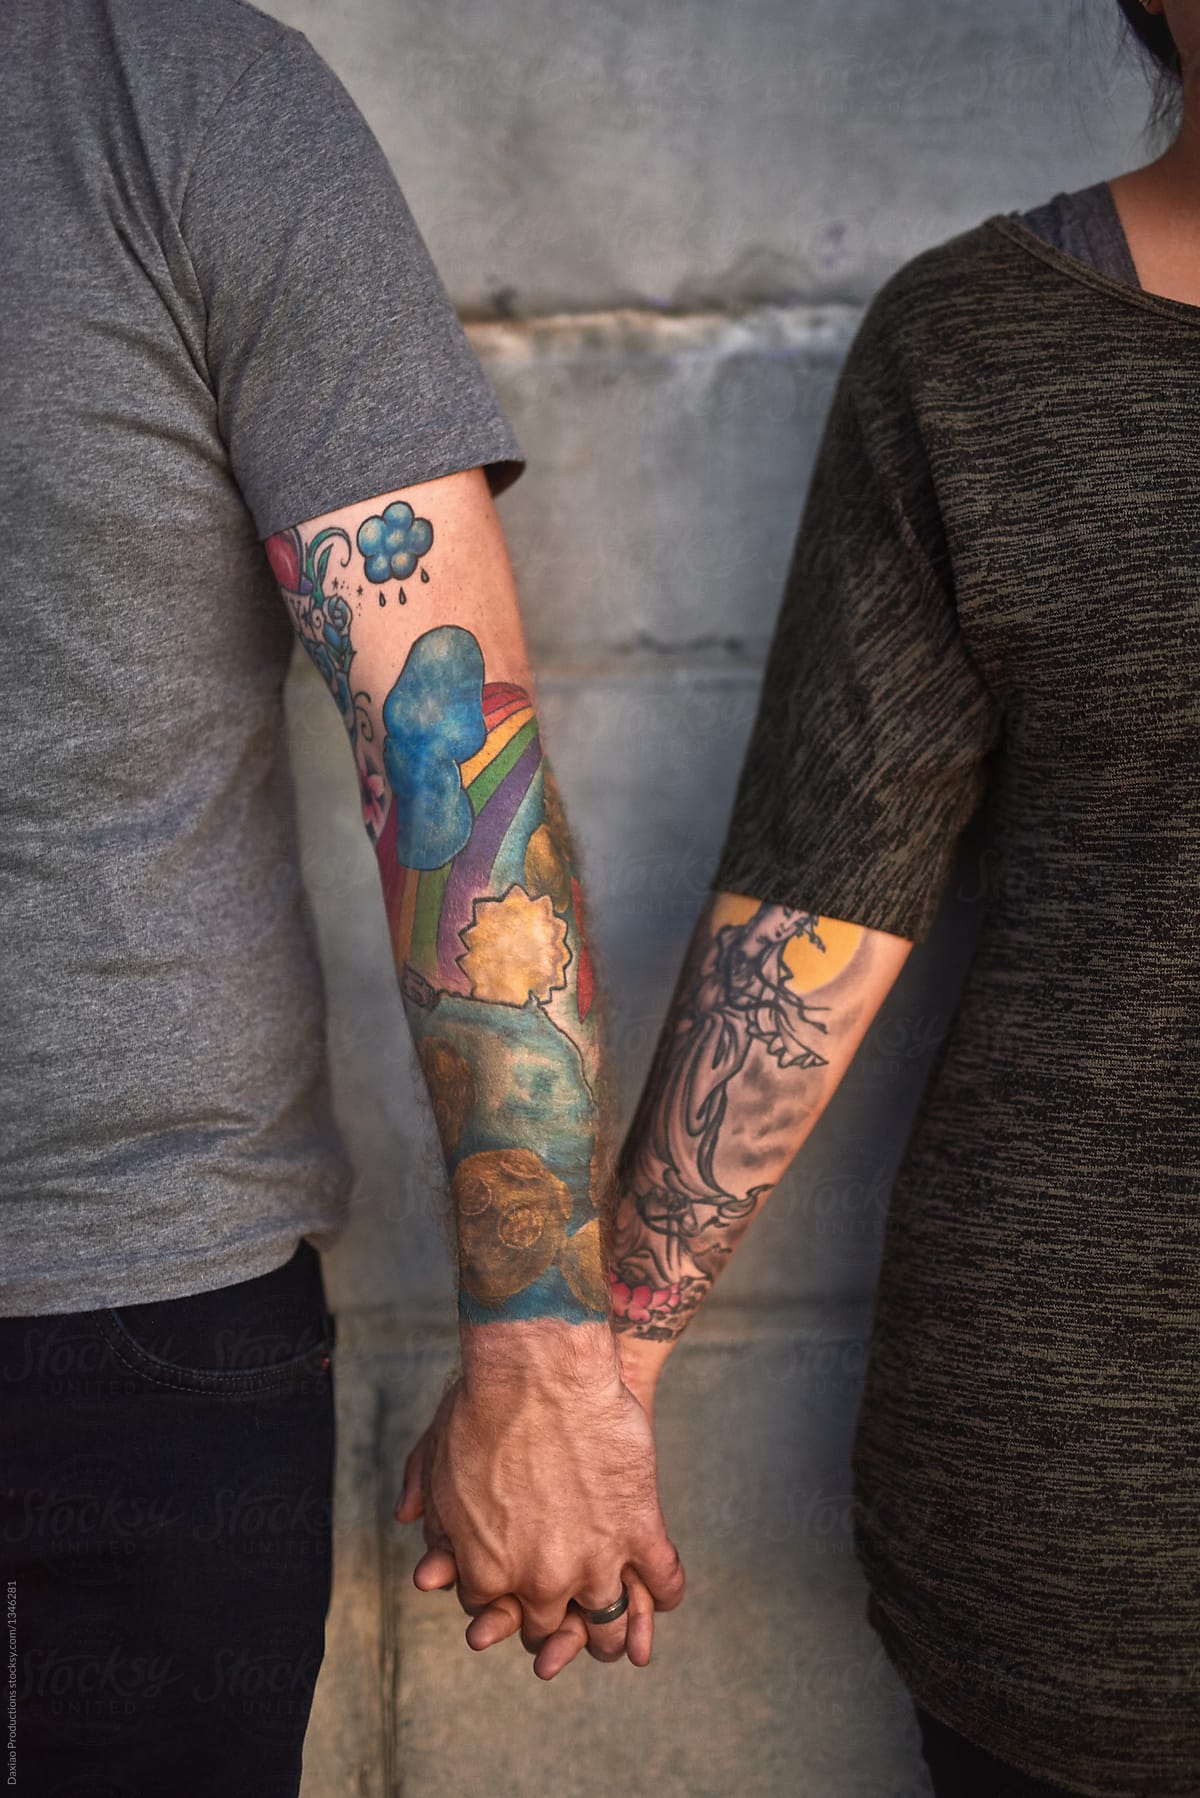 Tattooed couple holds hands